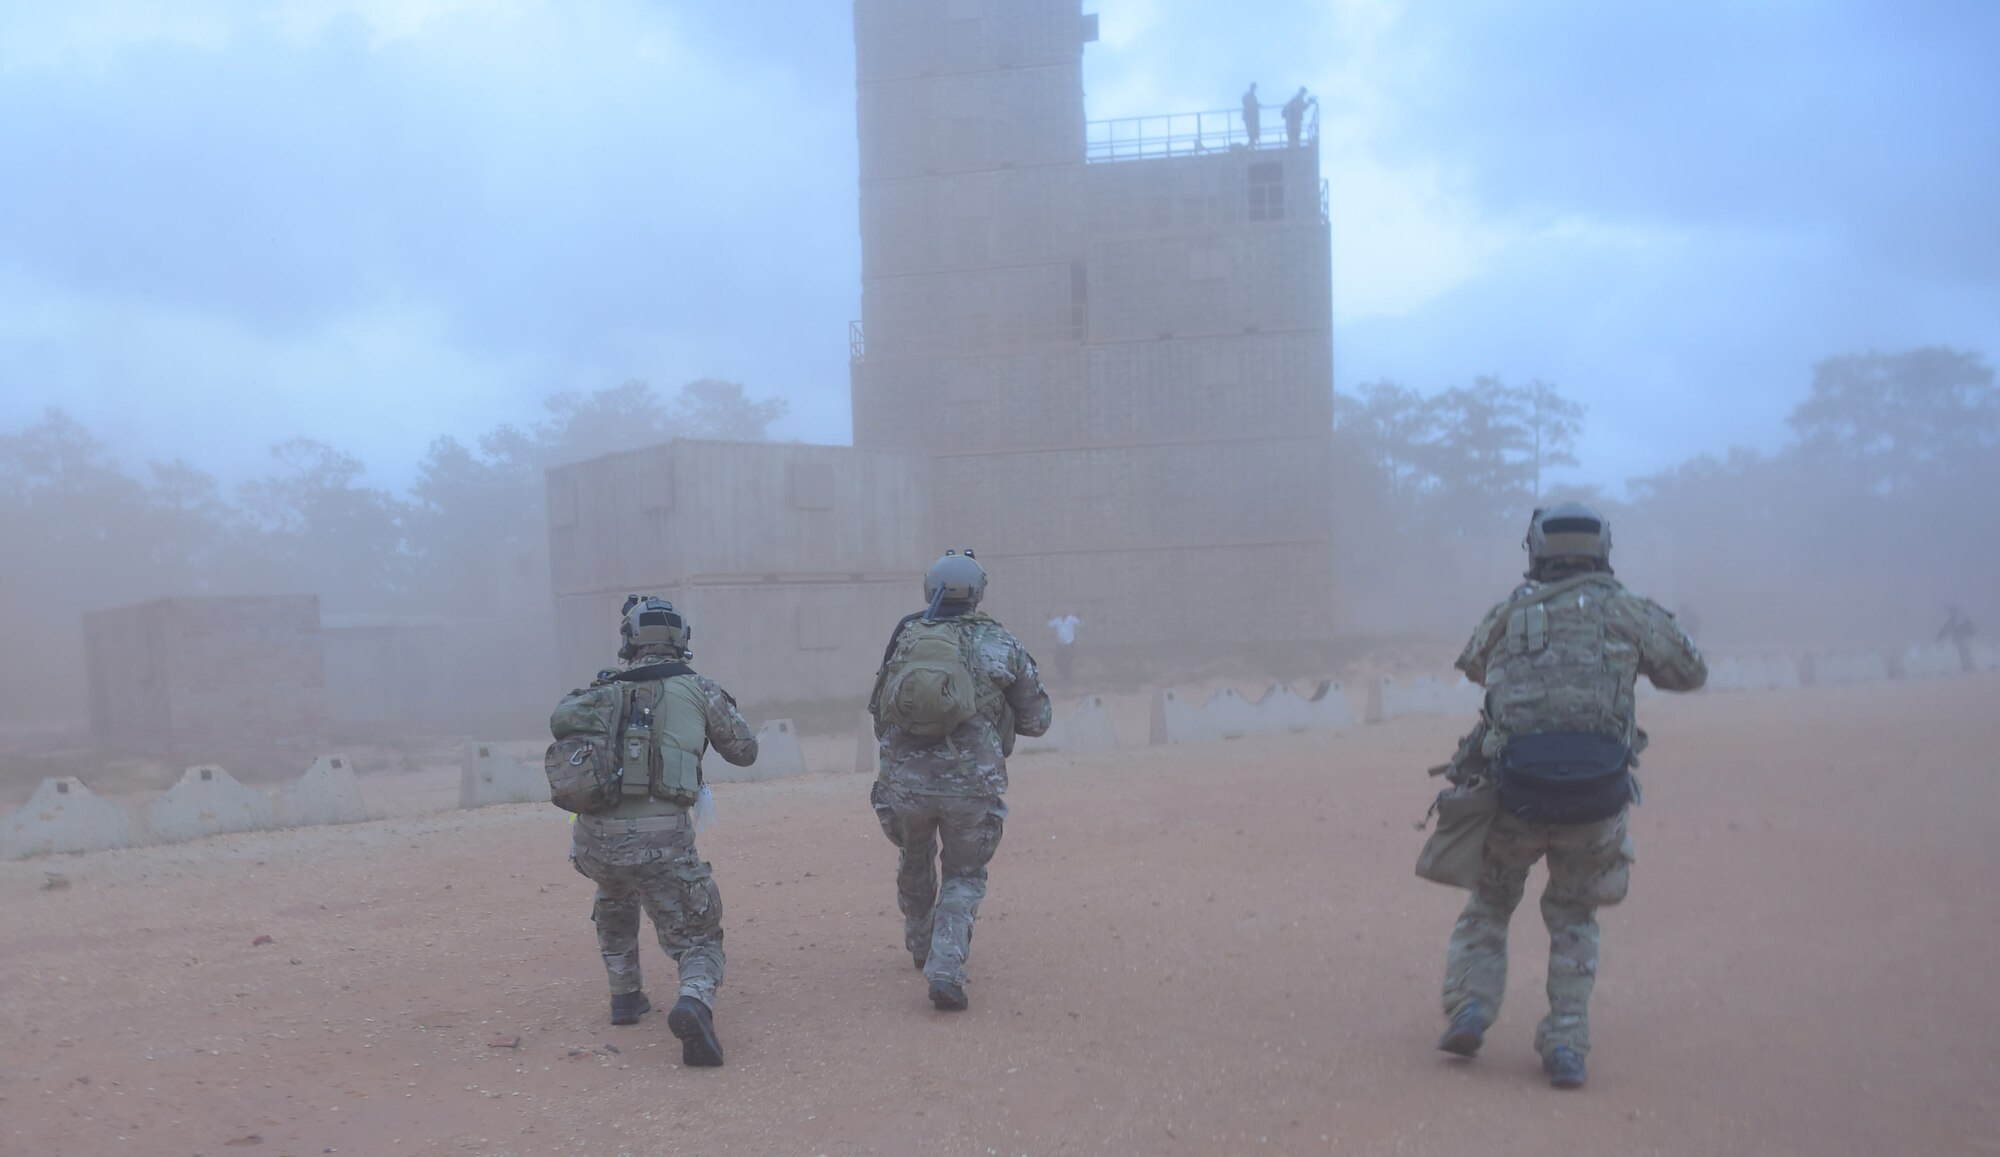 U.S. Soldiers assigned to the 7th Special Forces Group conduct urban warfare training during Emerald Warrior 17 at Hurlburt Field, Fla., March 7, 2017. Emerald Warrior is a U.S. Special Operations Command exercise during which joint special operations forces train to respond to various threats across the spectrum of conflict. (U.S. Air Force photo/Tech. Sgt. Barry Loo)